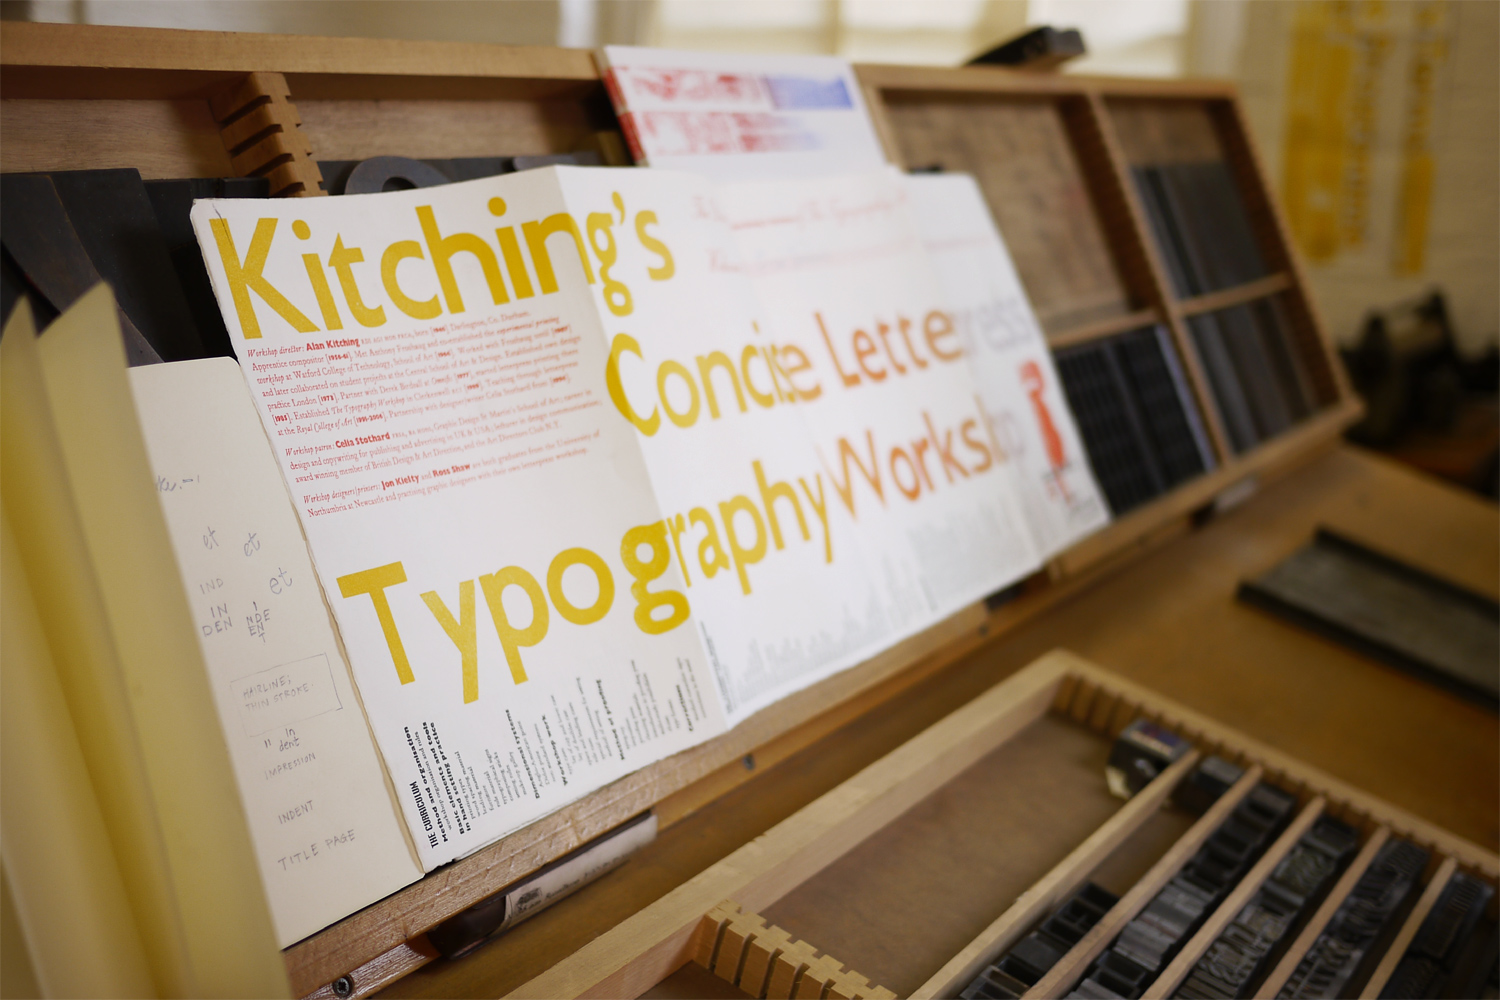 Kitching's Concise letterpress typography workshop